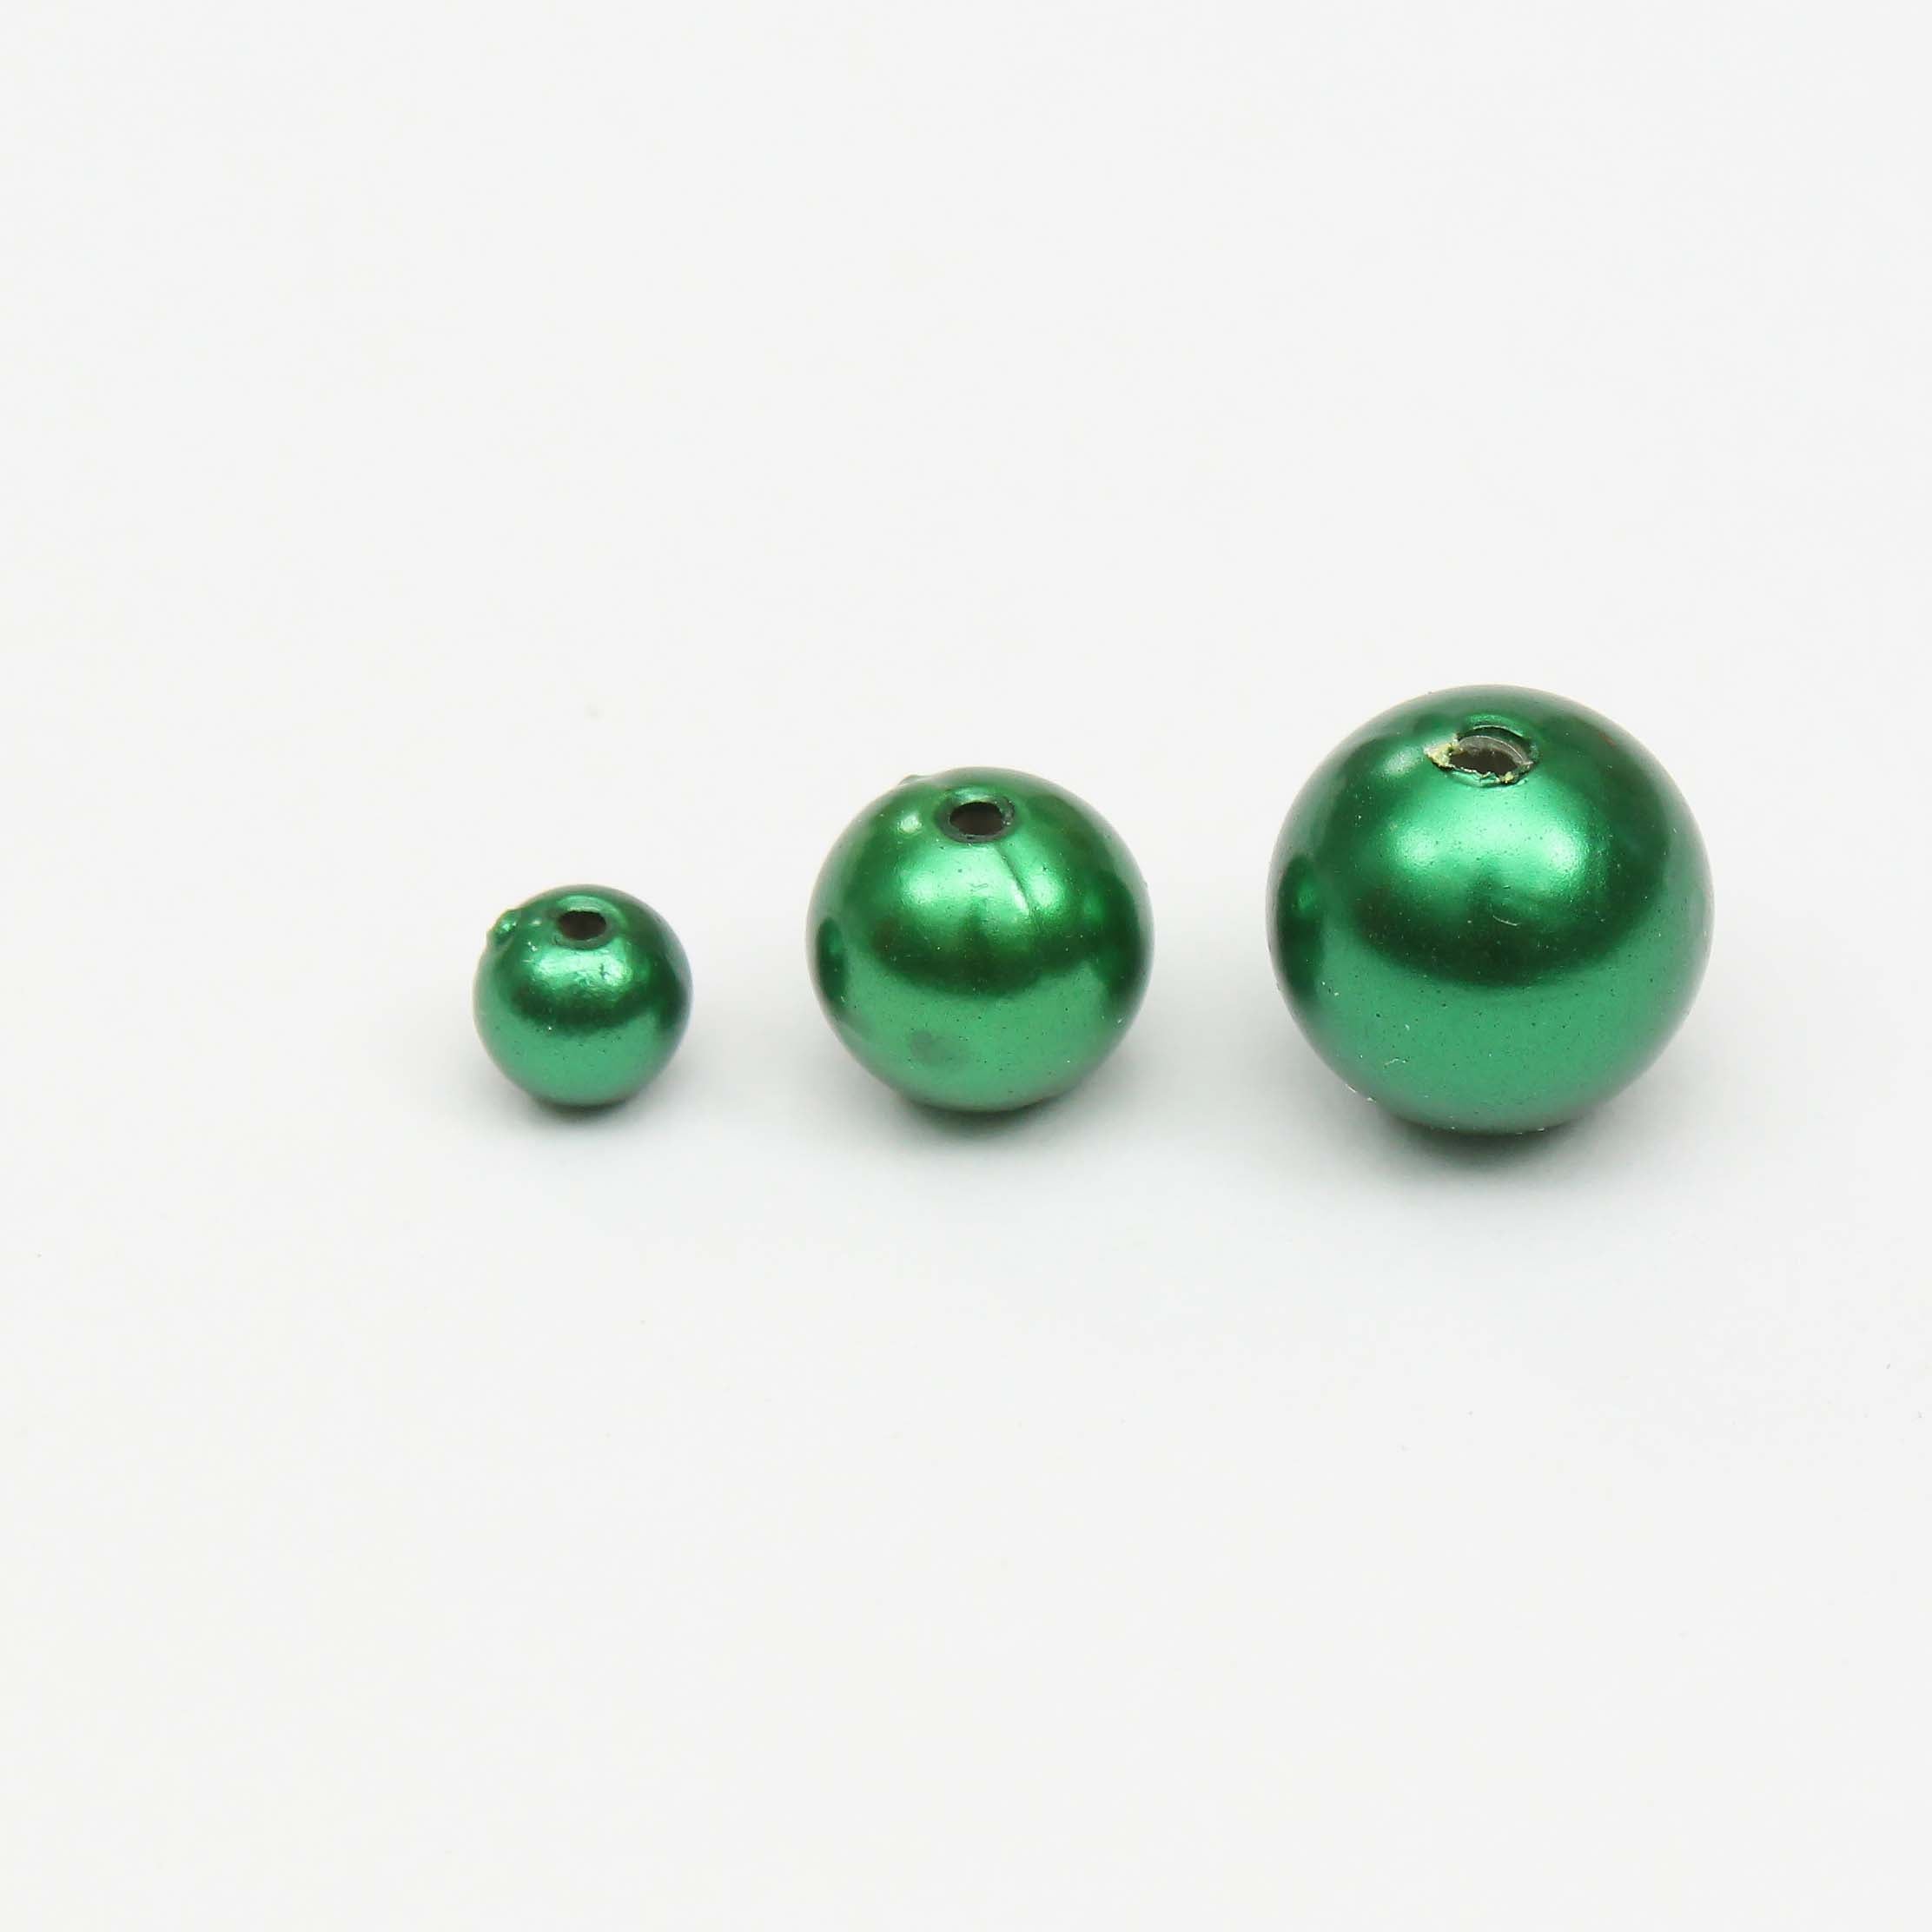 Christmas Elements - Green Pearl Beads, Assorted Size - 6mm,10mm,12mm, 30g